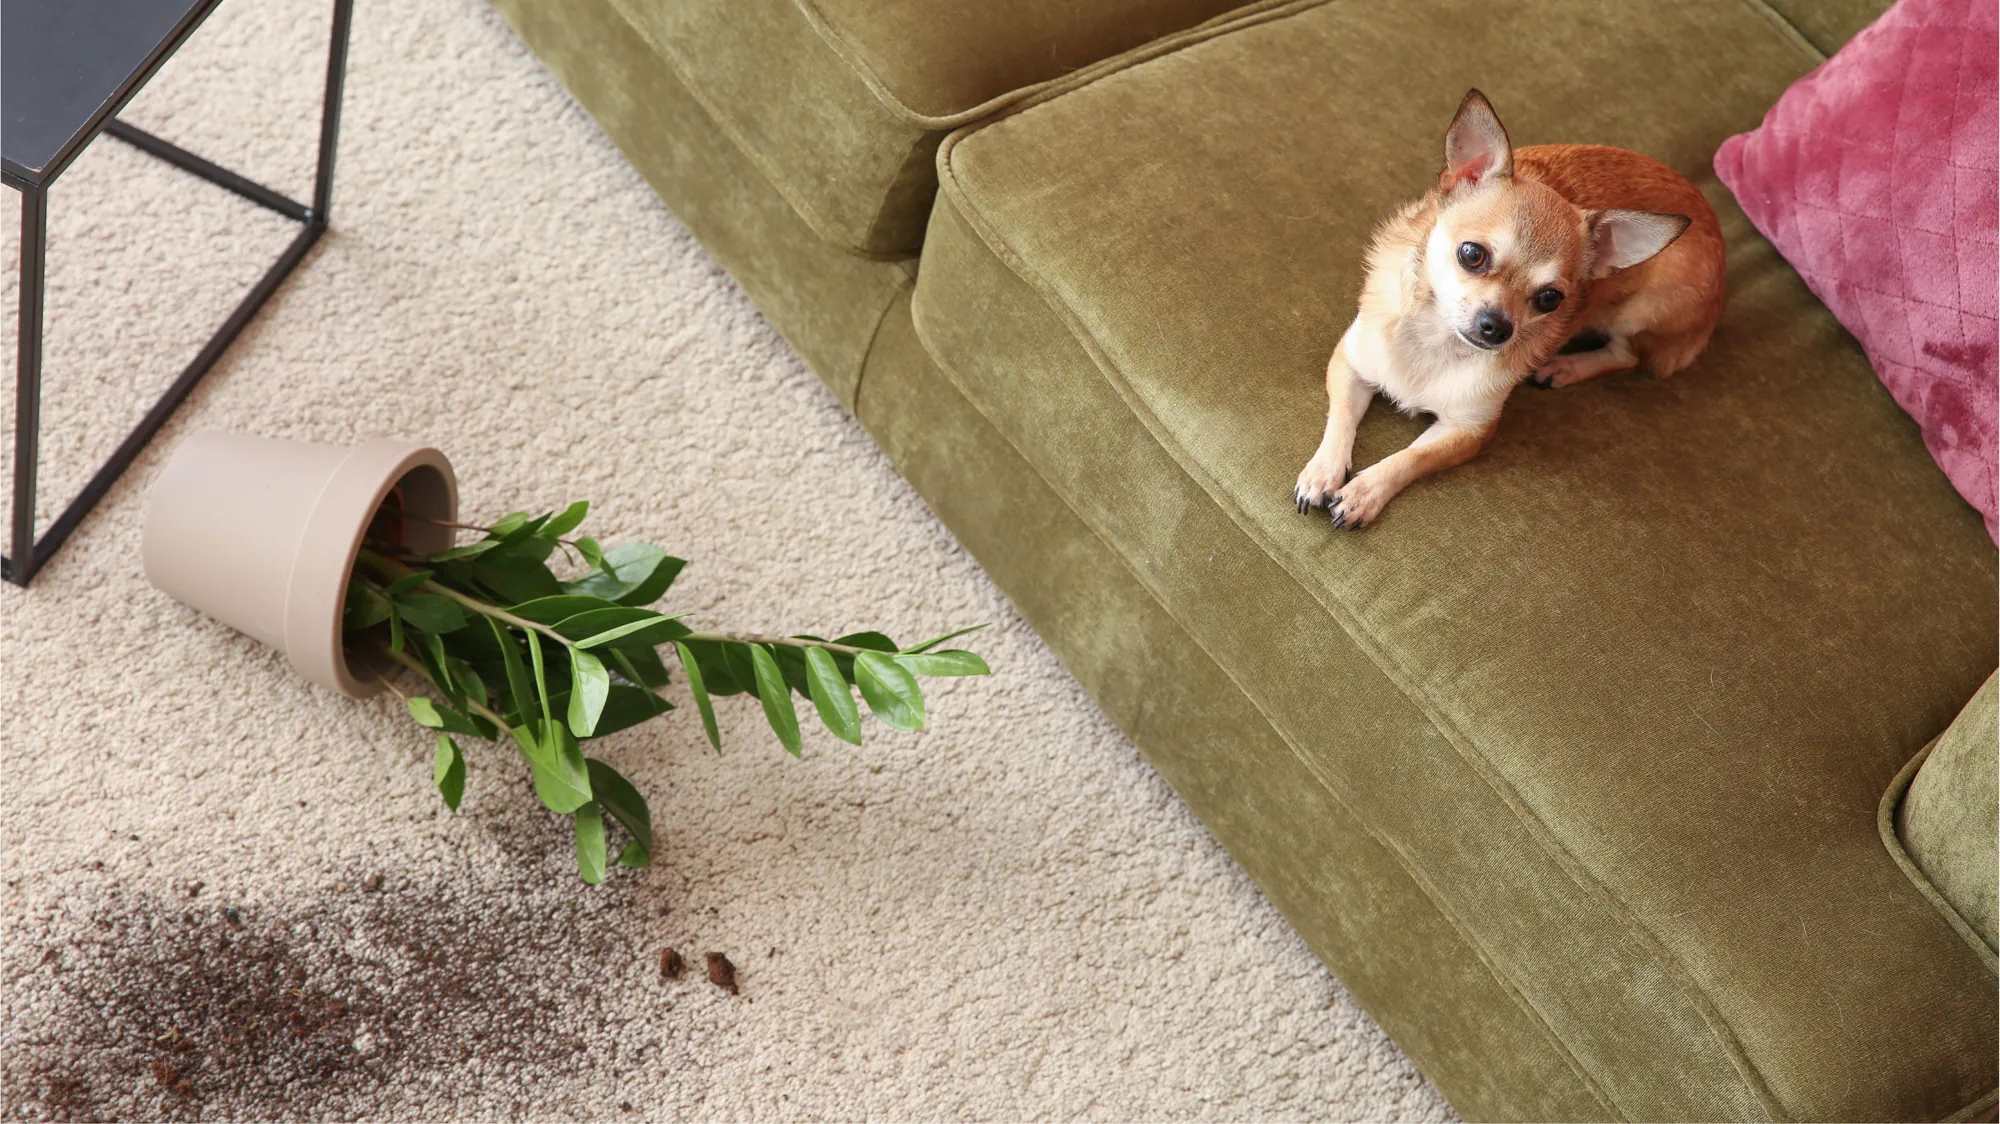 Dog sitting on a couch after knocking a plant and dirt onto the carpet.